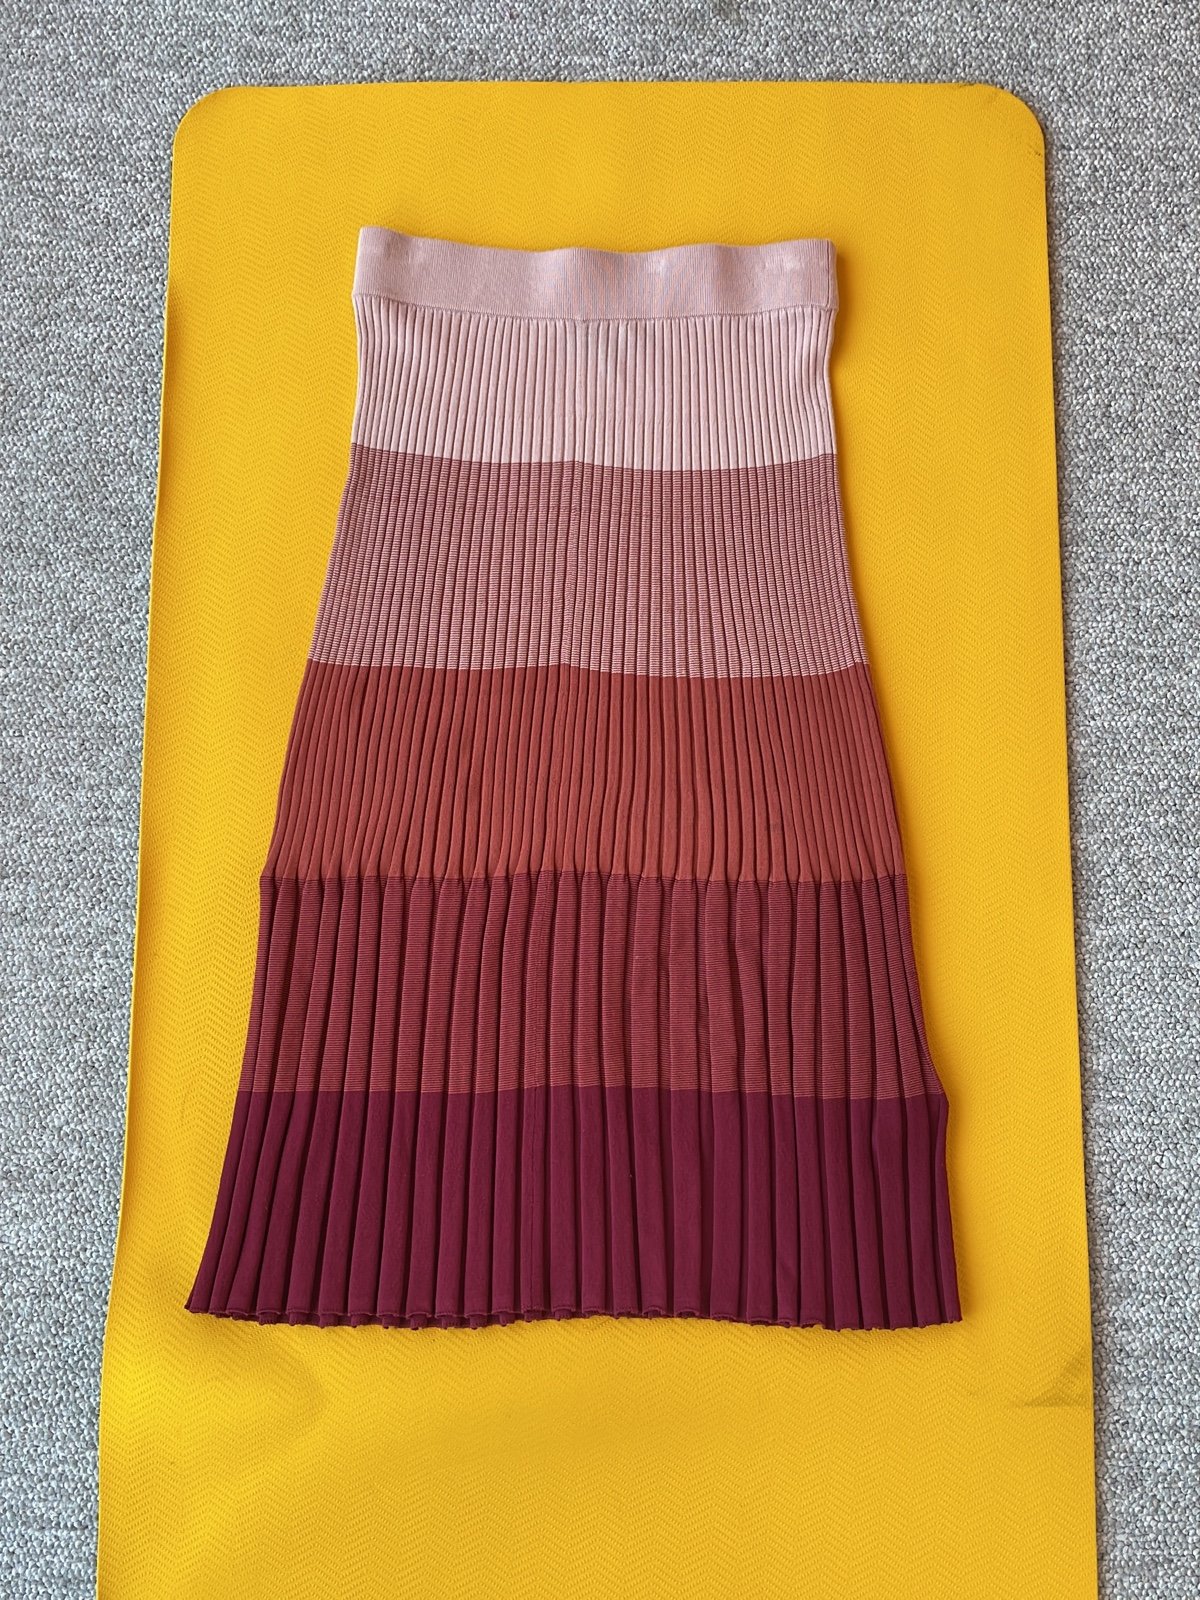 Great Banana Republic pleats skirt size PS prfCPZ1Vj Buying Cheap